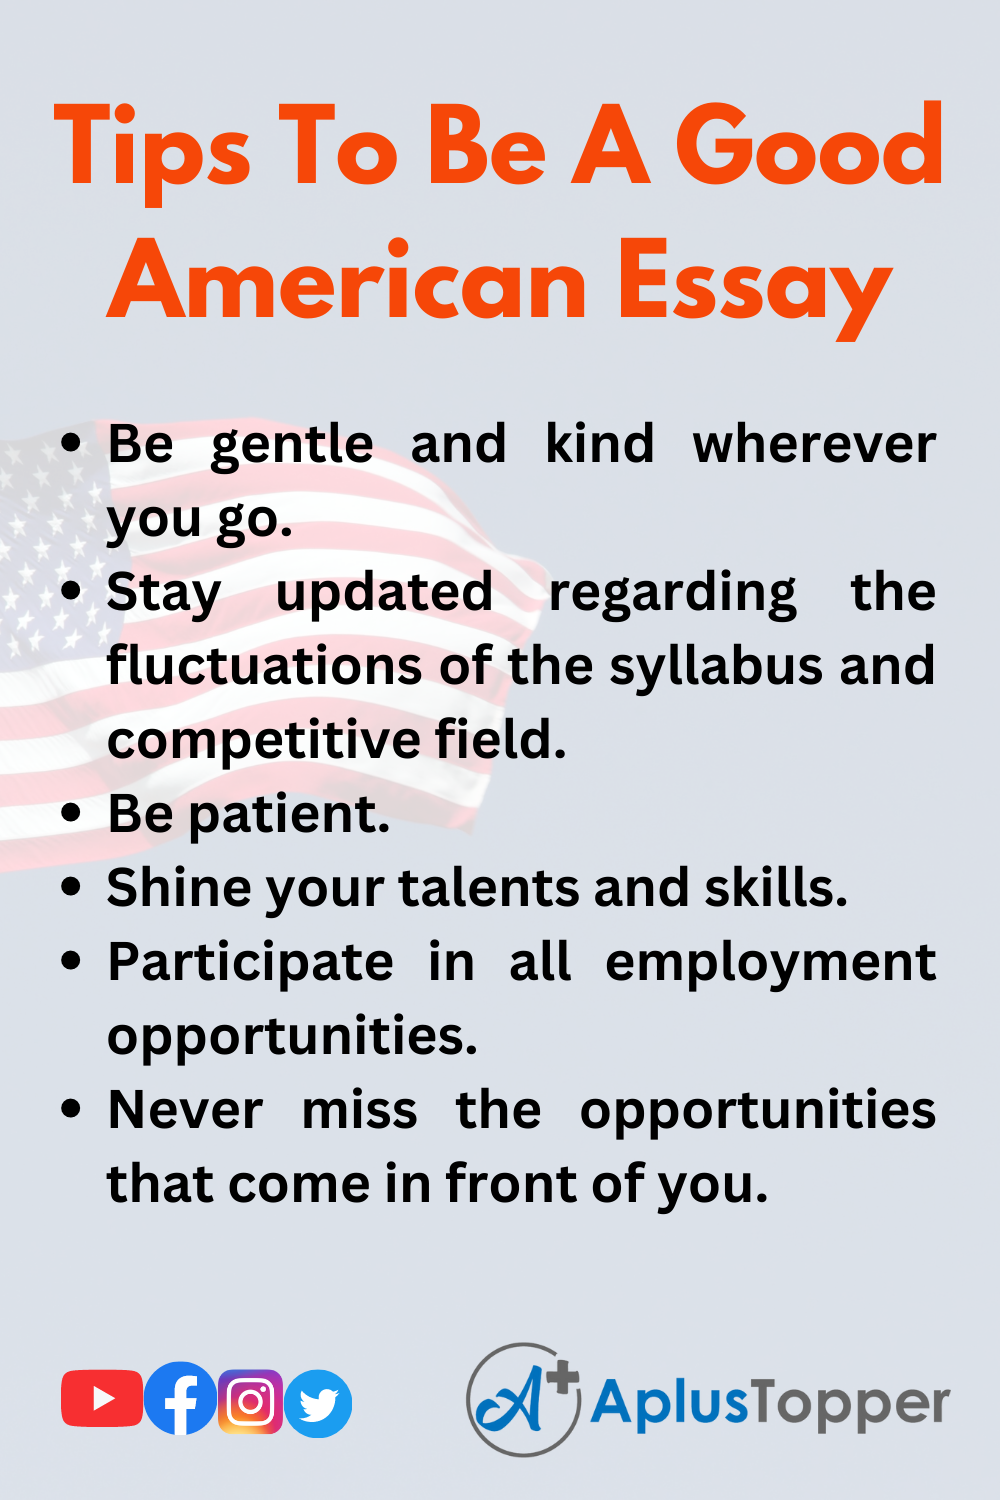 Tips To Be A Good American Essay